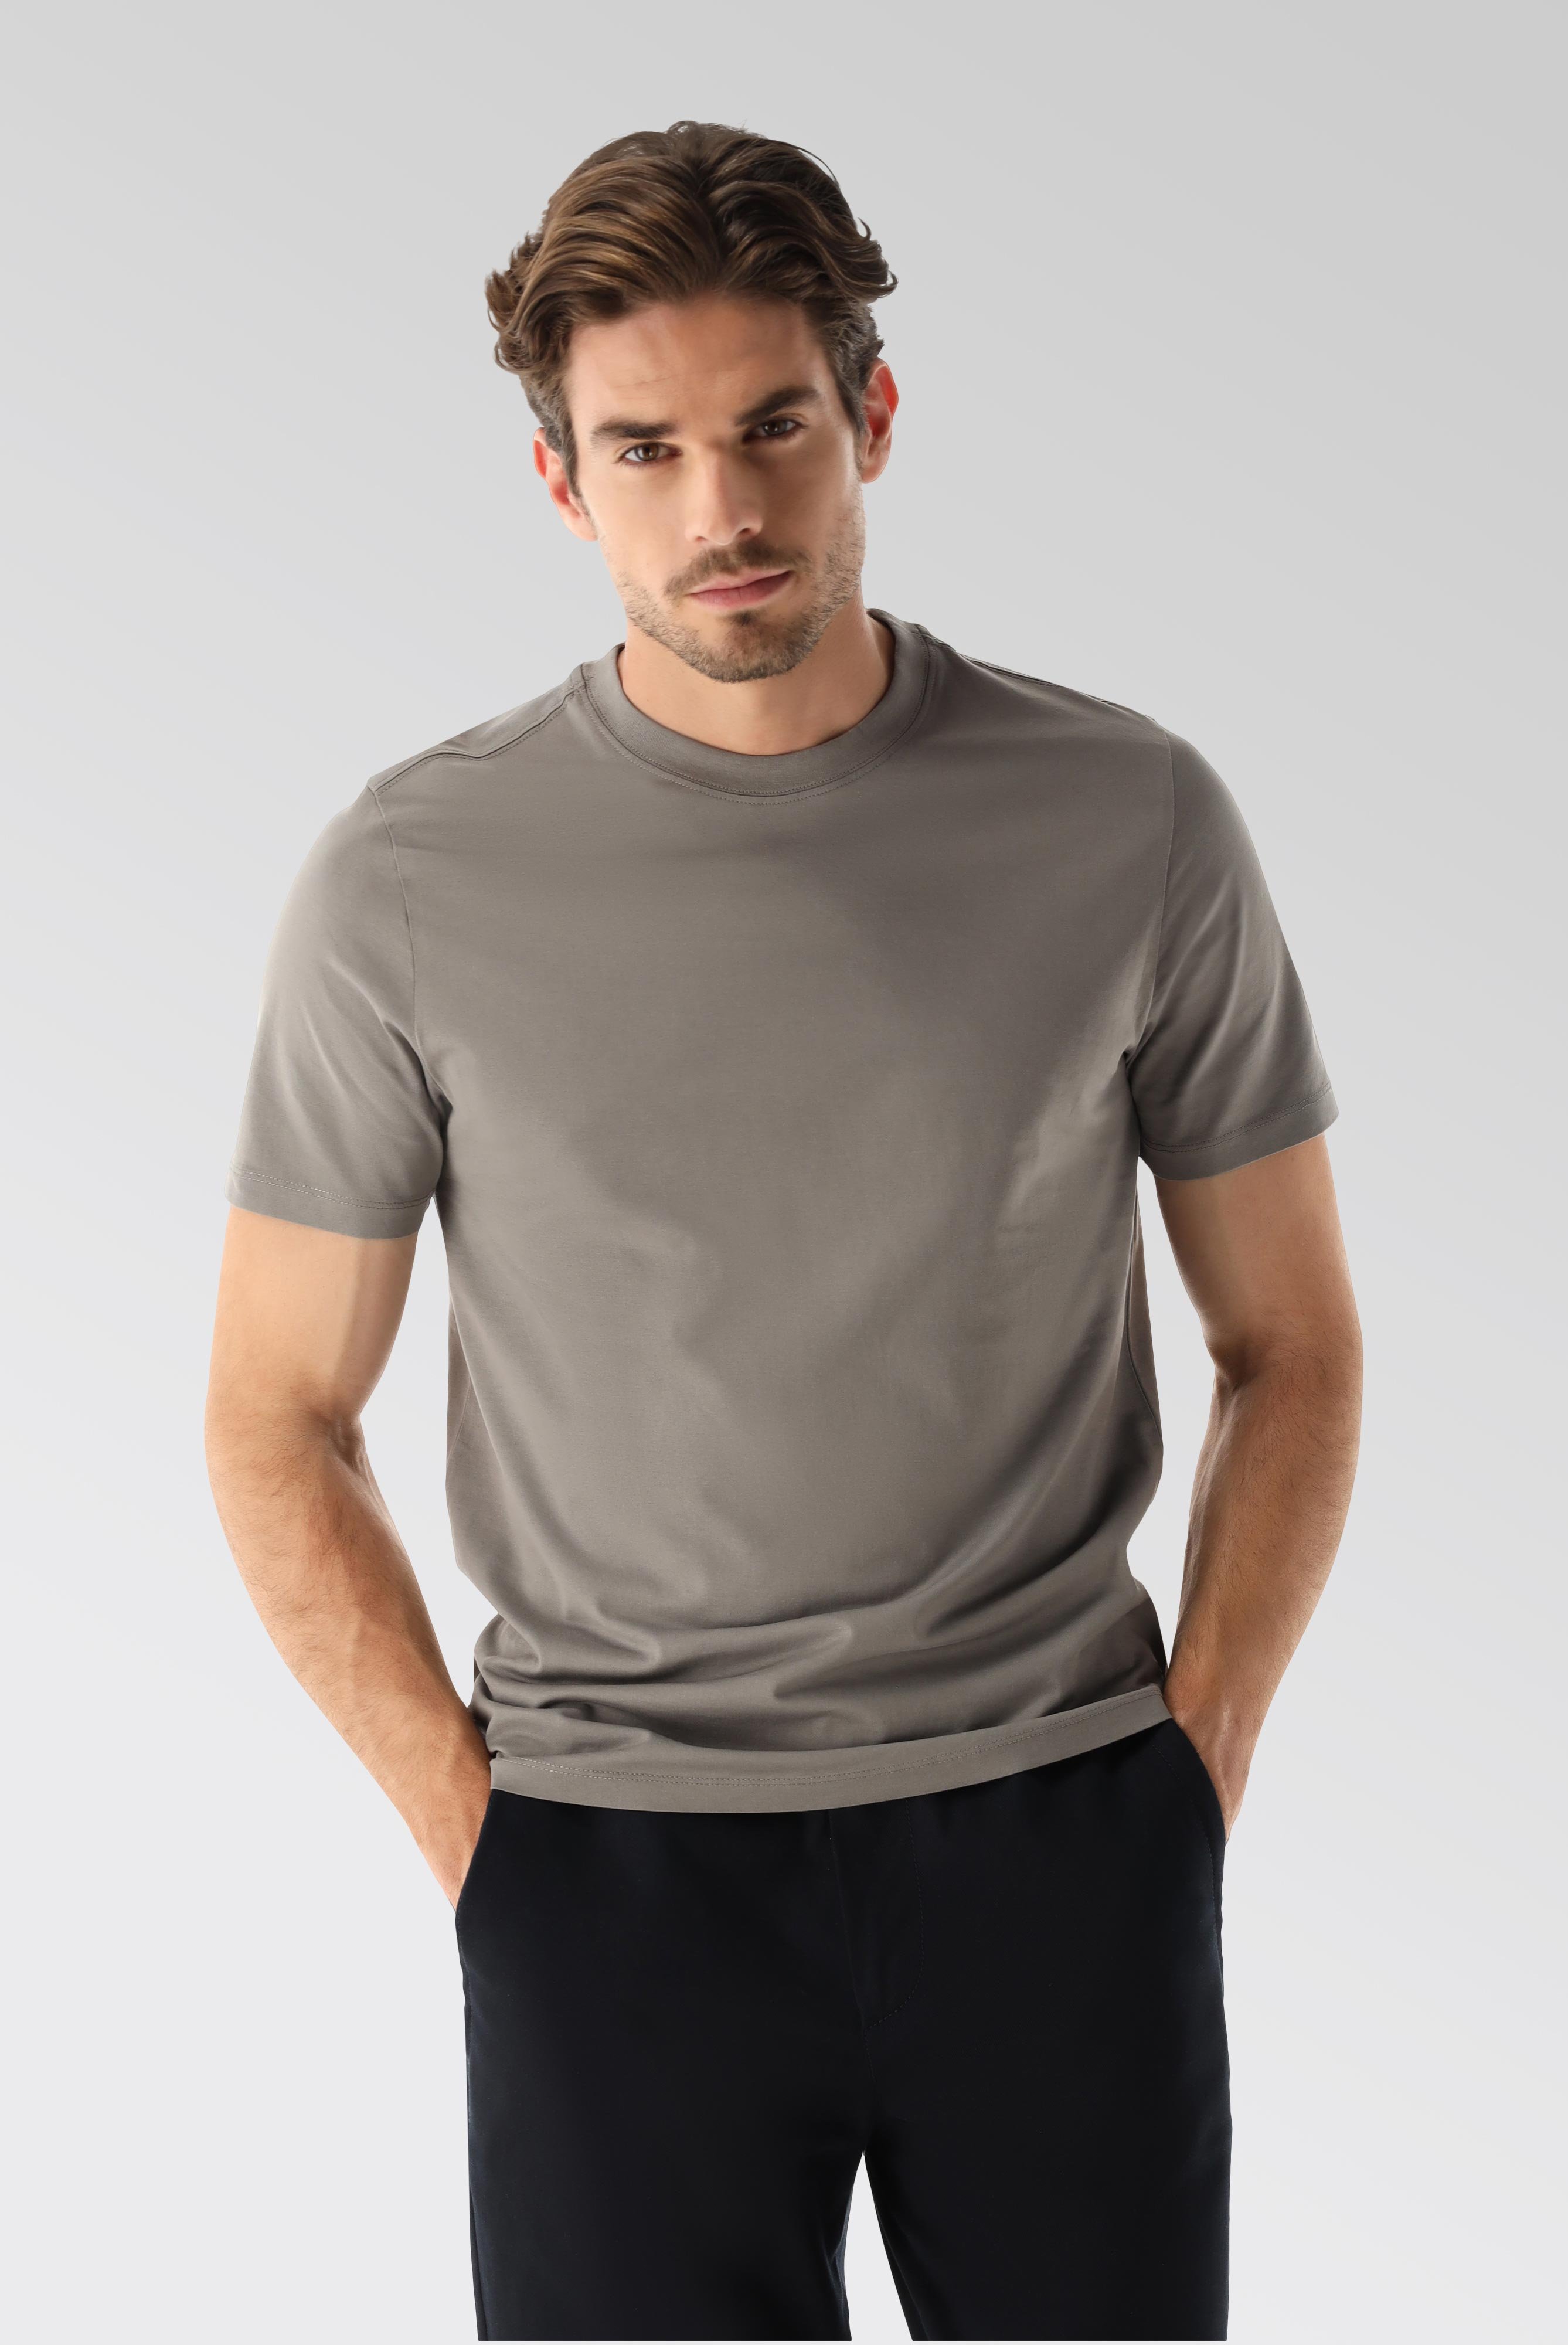 T-Shirts+Relaxed Fit Crew Neck Jersey T-Shirt+20.1660..Z20044.060.XXL